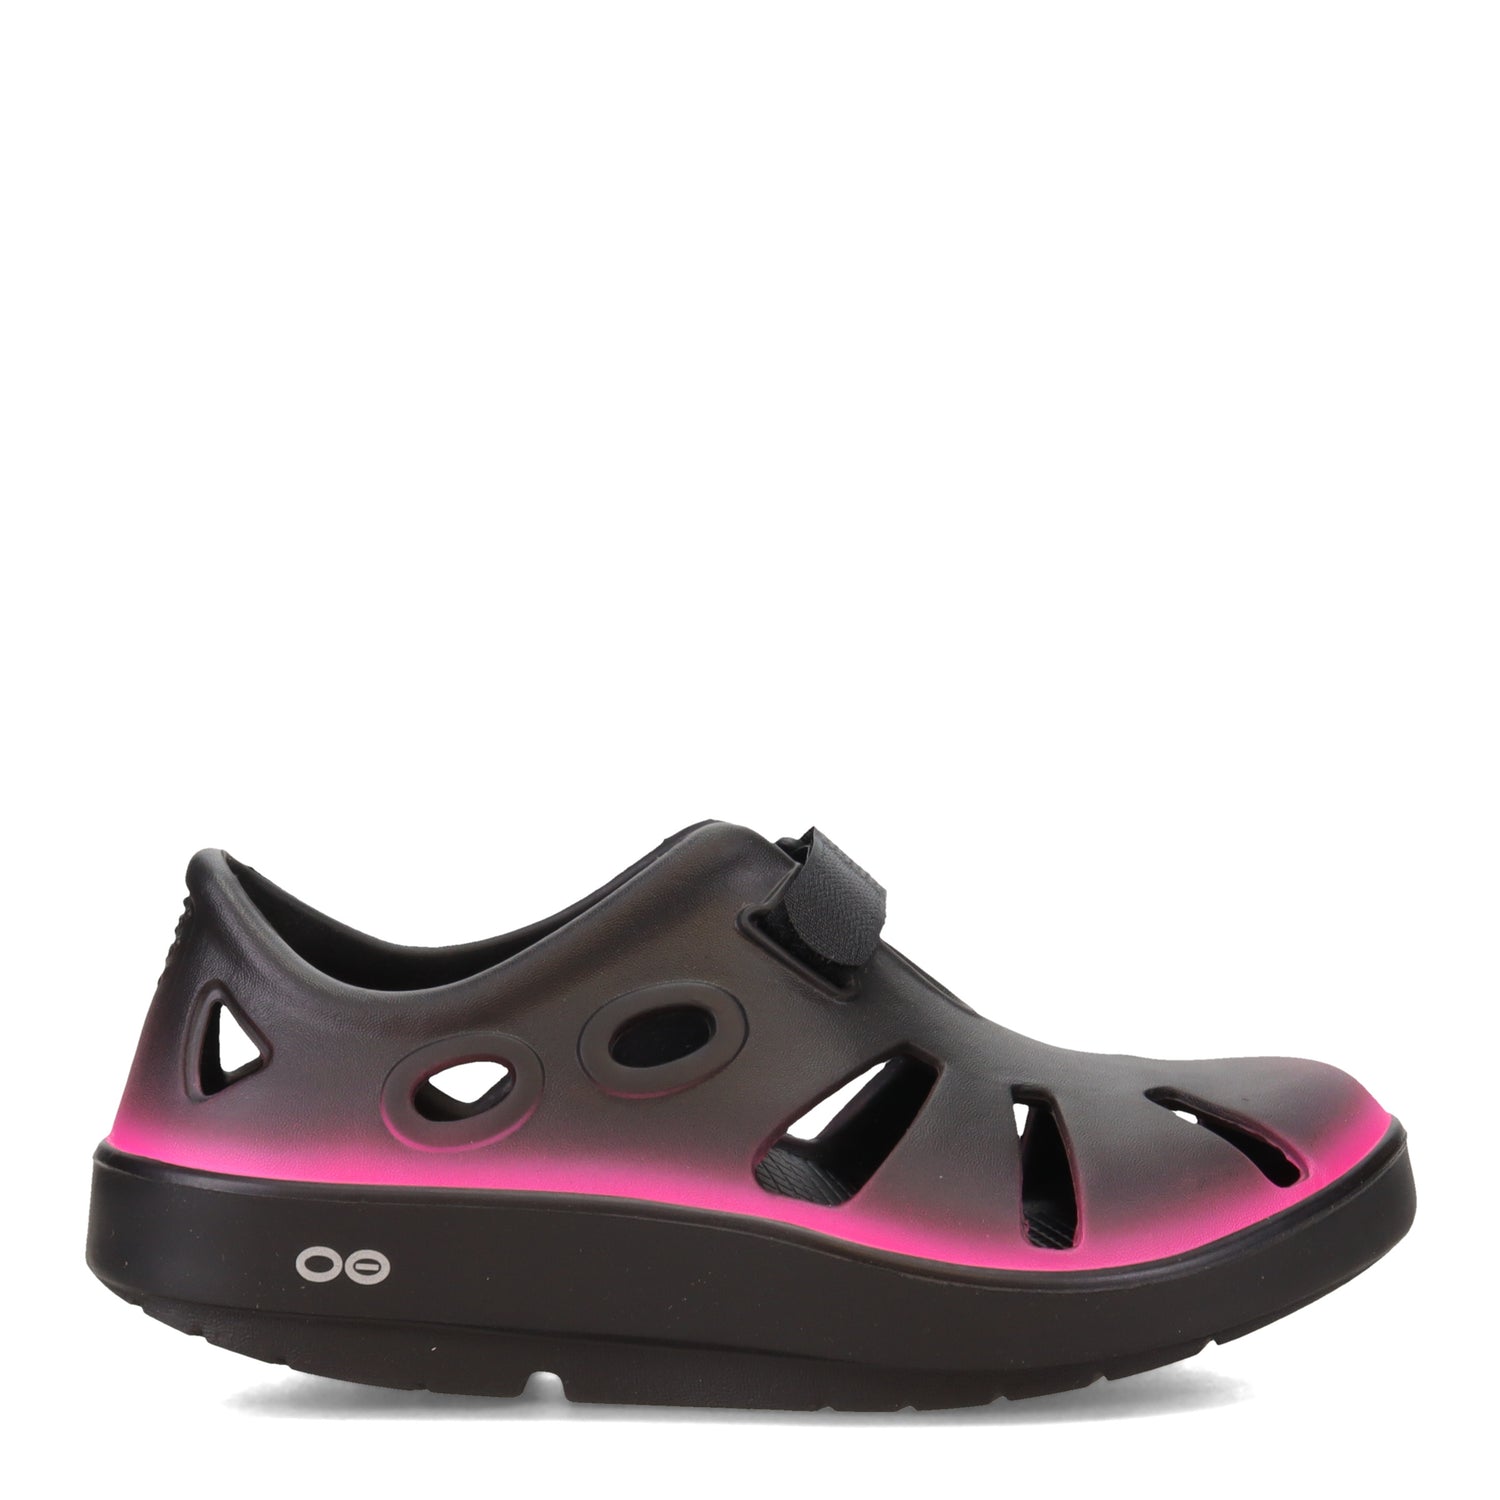 NEW Oofos OOcloog Black Women’s Recovery Shoes Size 8 Medium